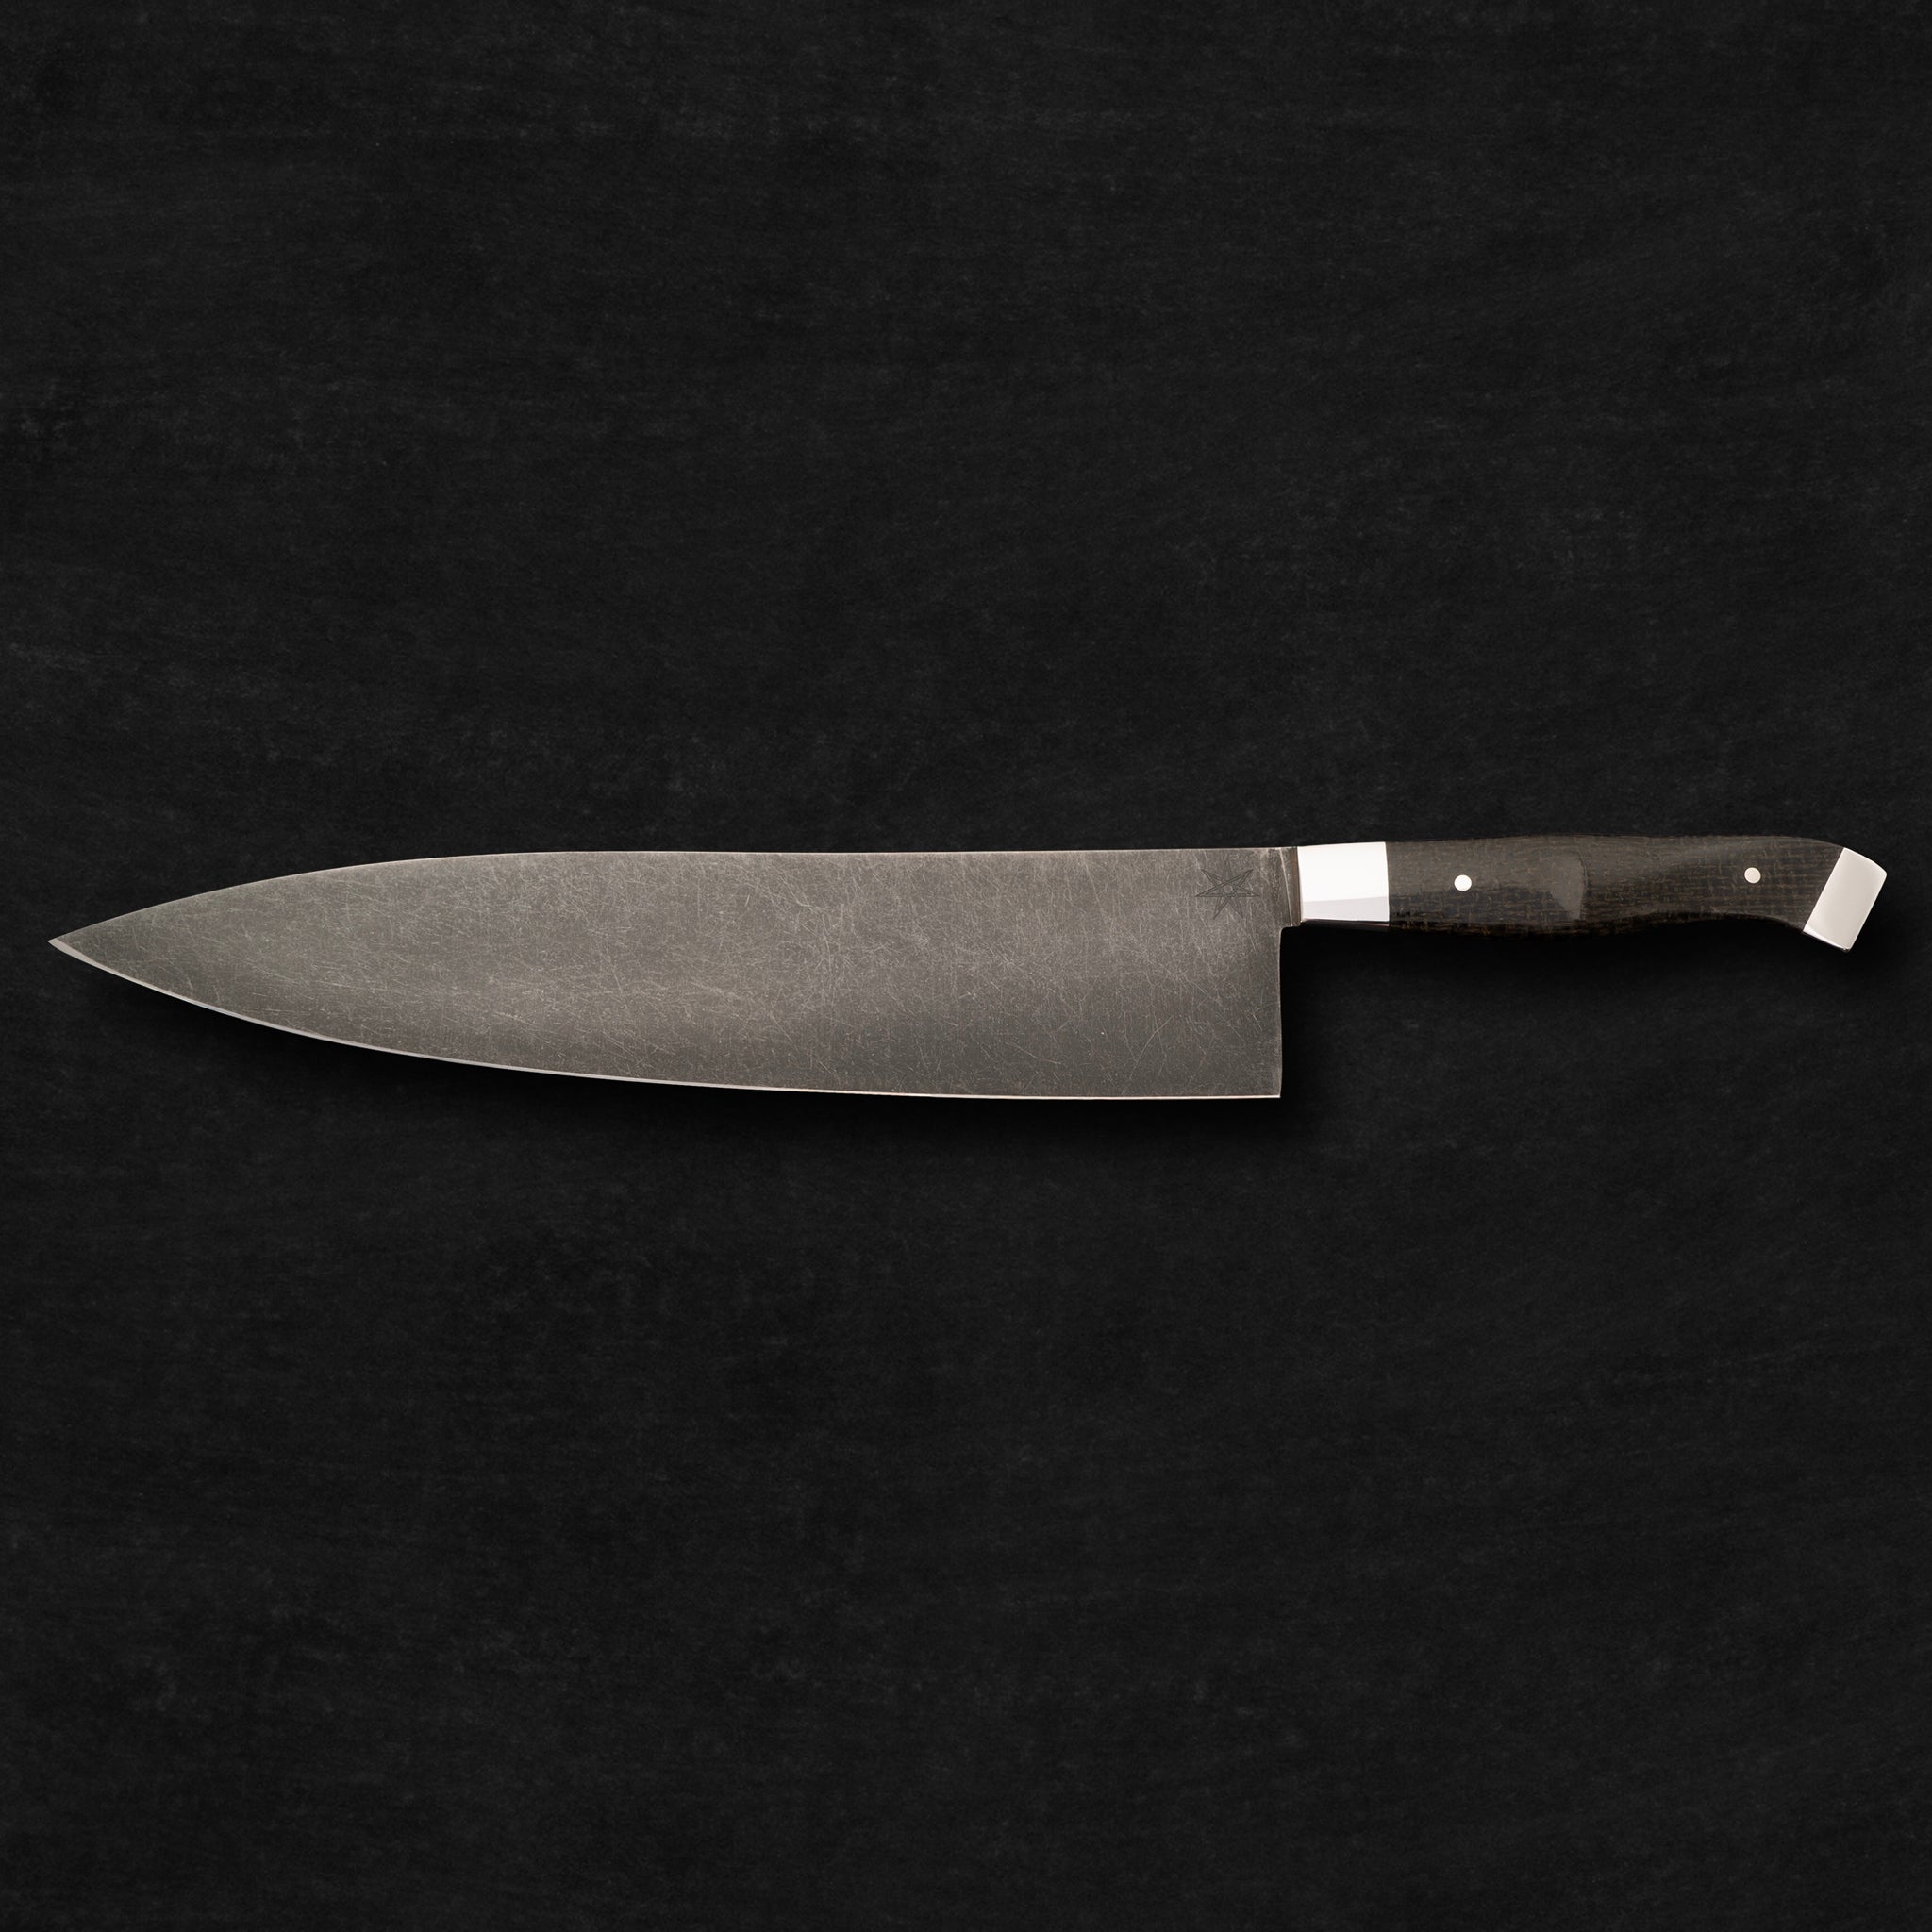 10" Carbon Steel Chef Knife with Stonewash Finish Blade, Black Burlap Micarta Handle, Stainless Steel Bolster and Pommel by Town Cutler